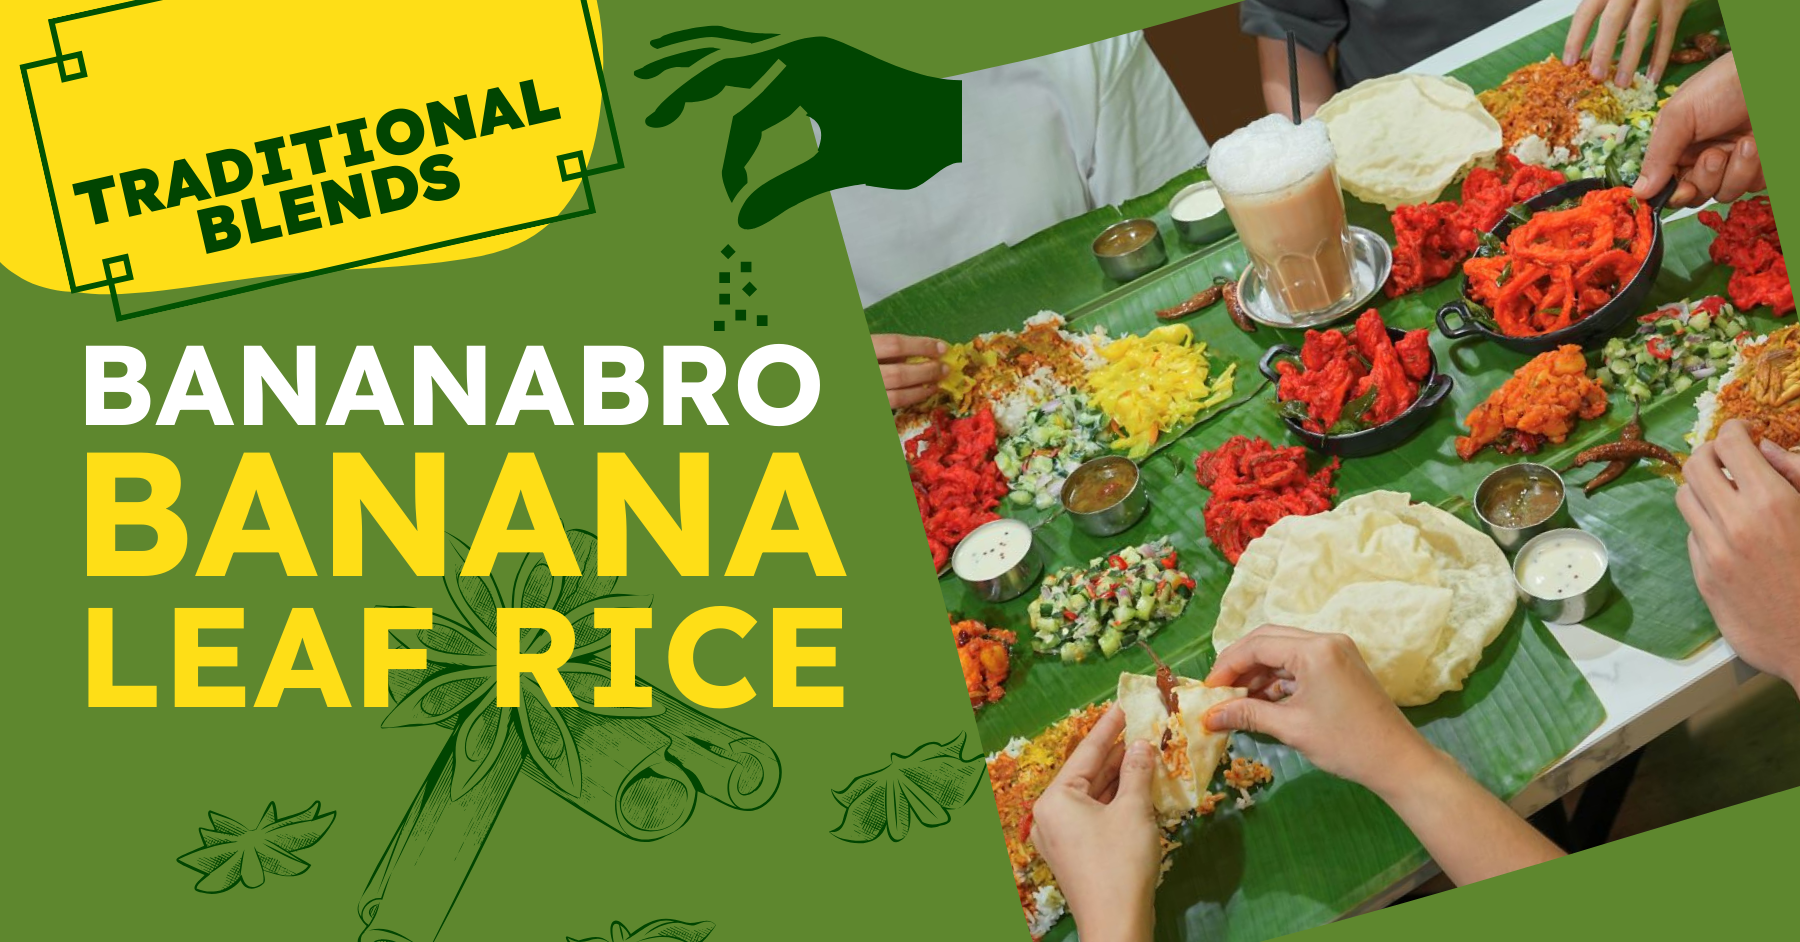 Discovering the Traditional Blends for Banana Leaf Rice